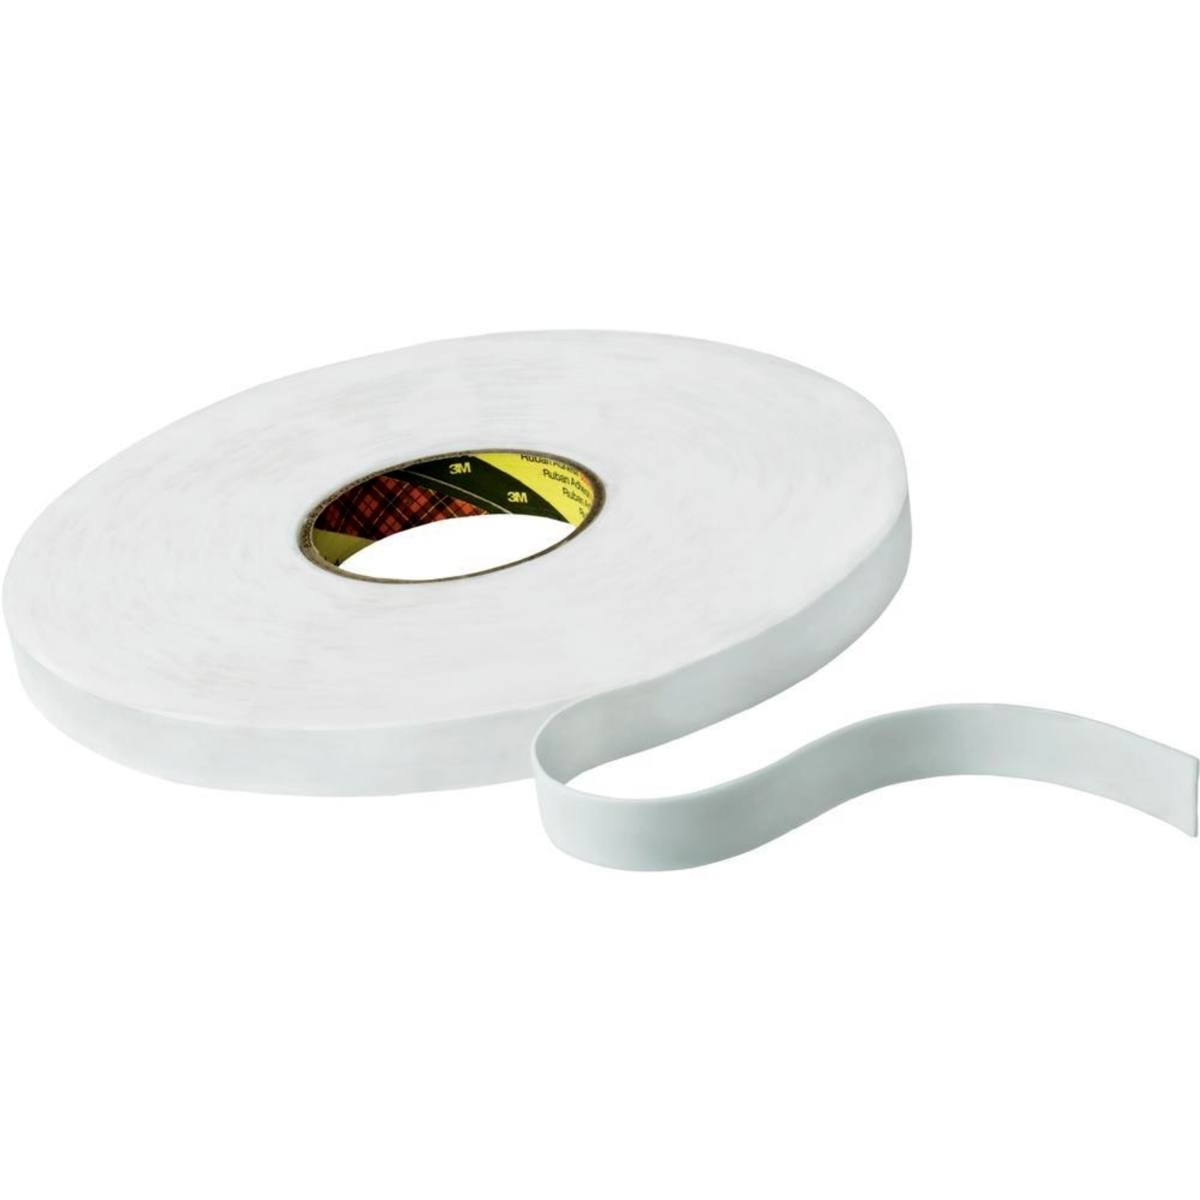 3M PE foam adhesive tape with acrylic adhesive 9546, white, 15 mm x 66 m, 1.1 mm